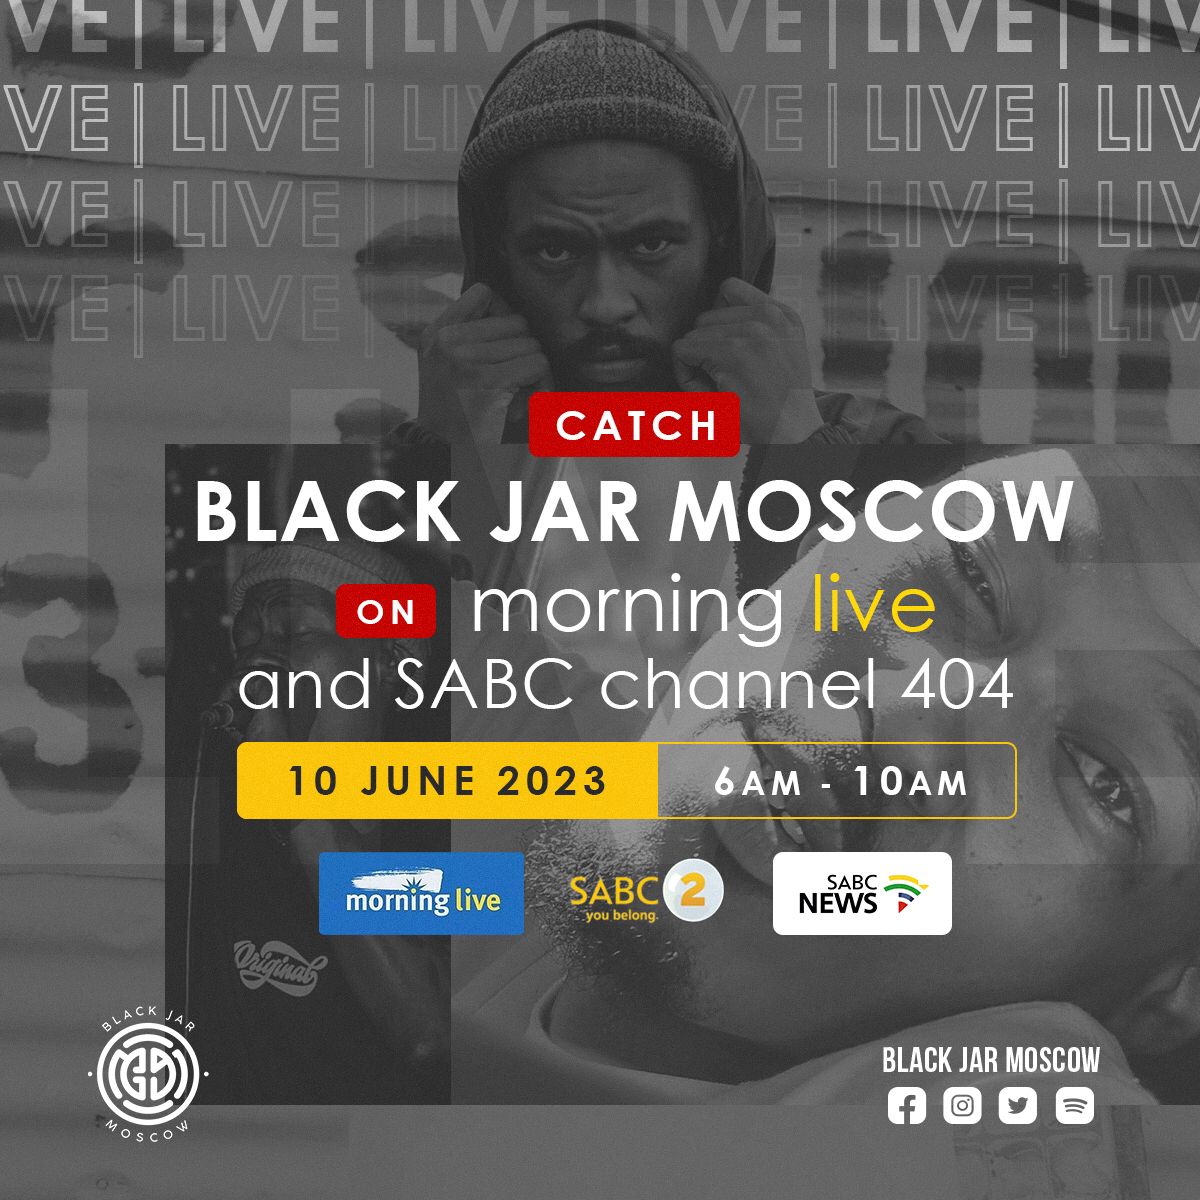 Greatness beckons for those who keep Greatness in close proximity. Tune in, or you'll be tuned out..

@blackjarmoscow 🙌🏾🙌🏾